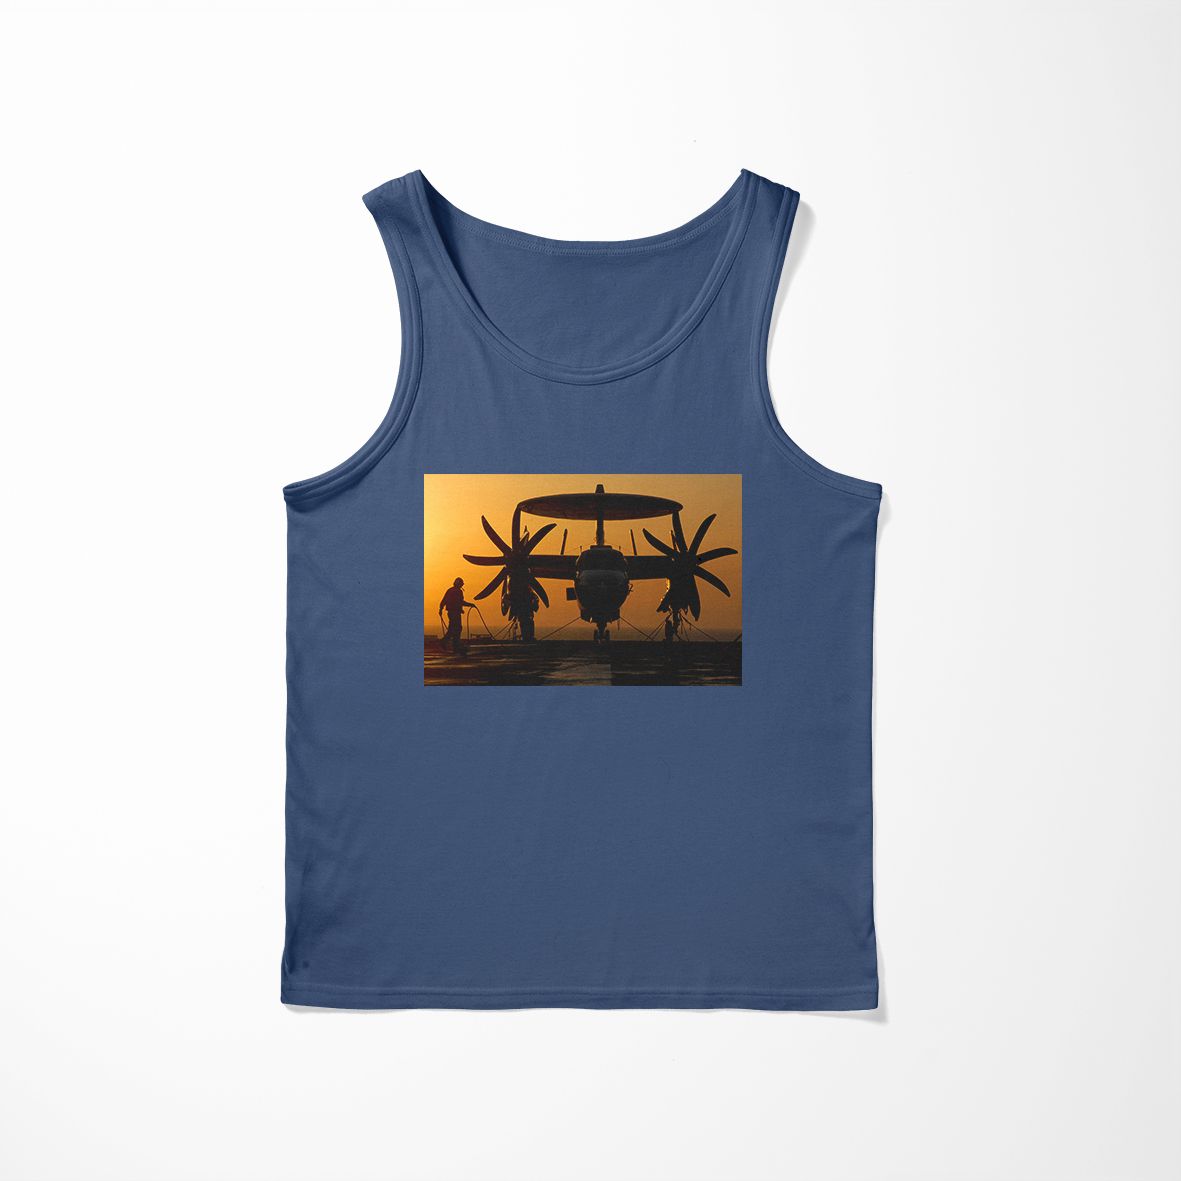 Military Plane at Sunset Designed Tank Tops